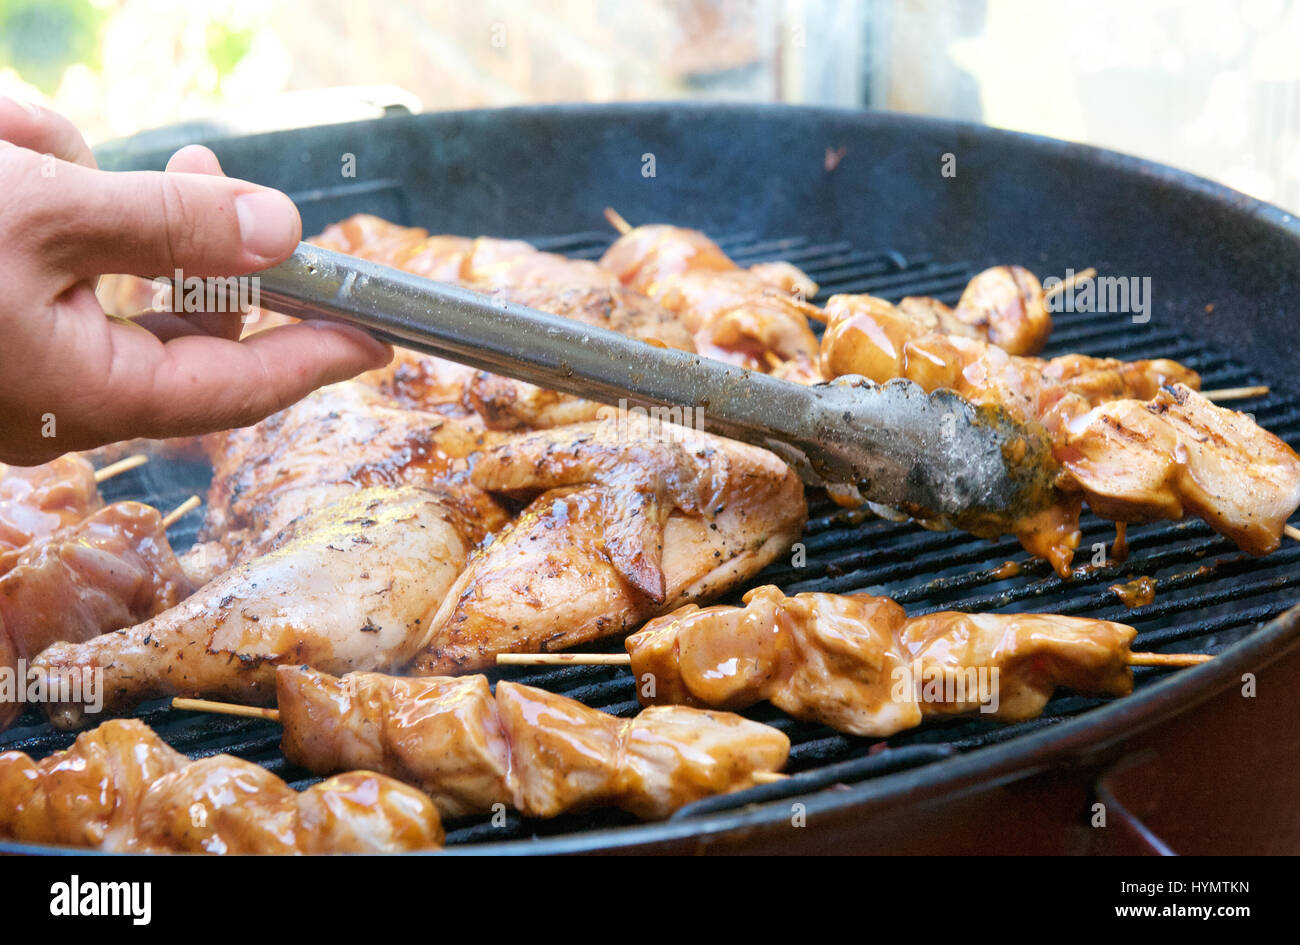 Hand holding tongs to turn over barbecue chicken Stock Photo